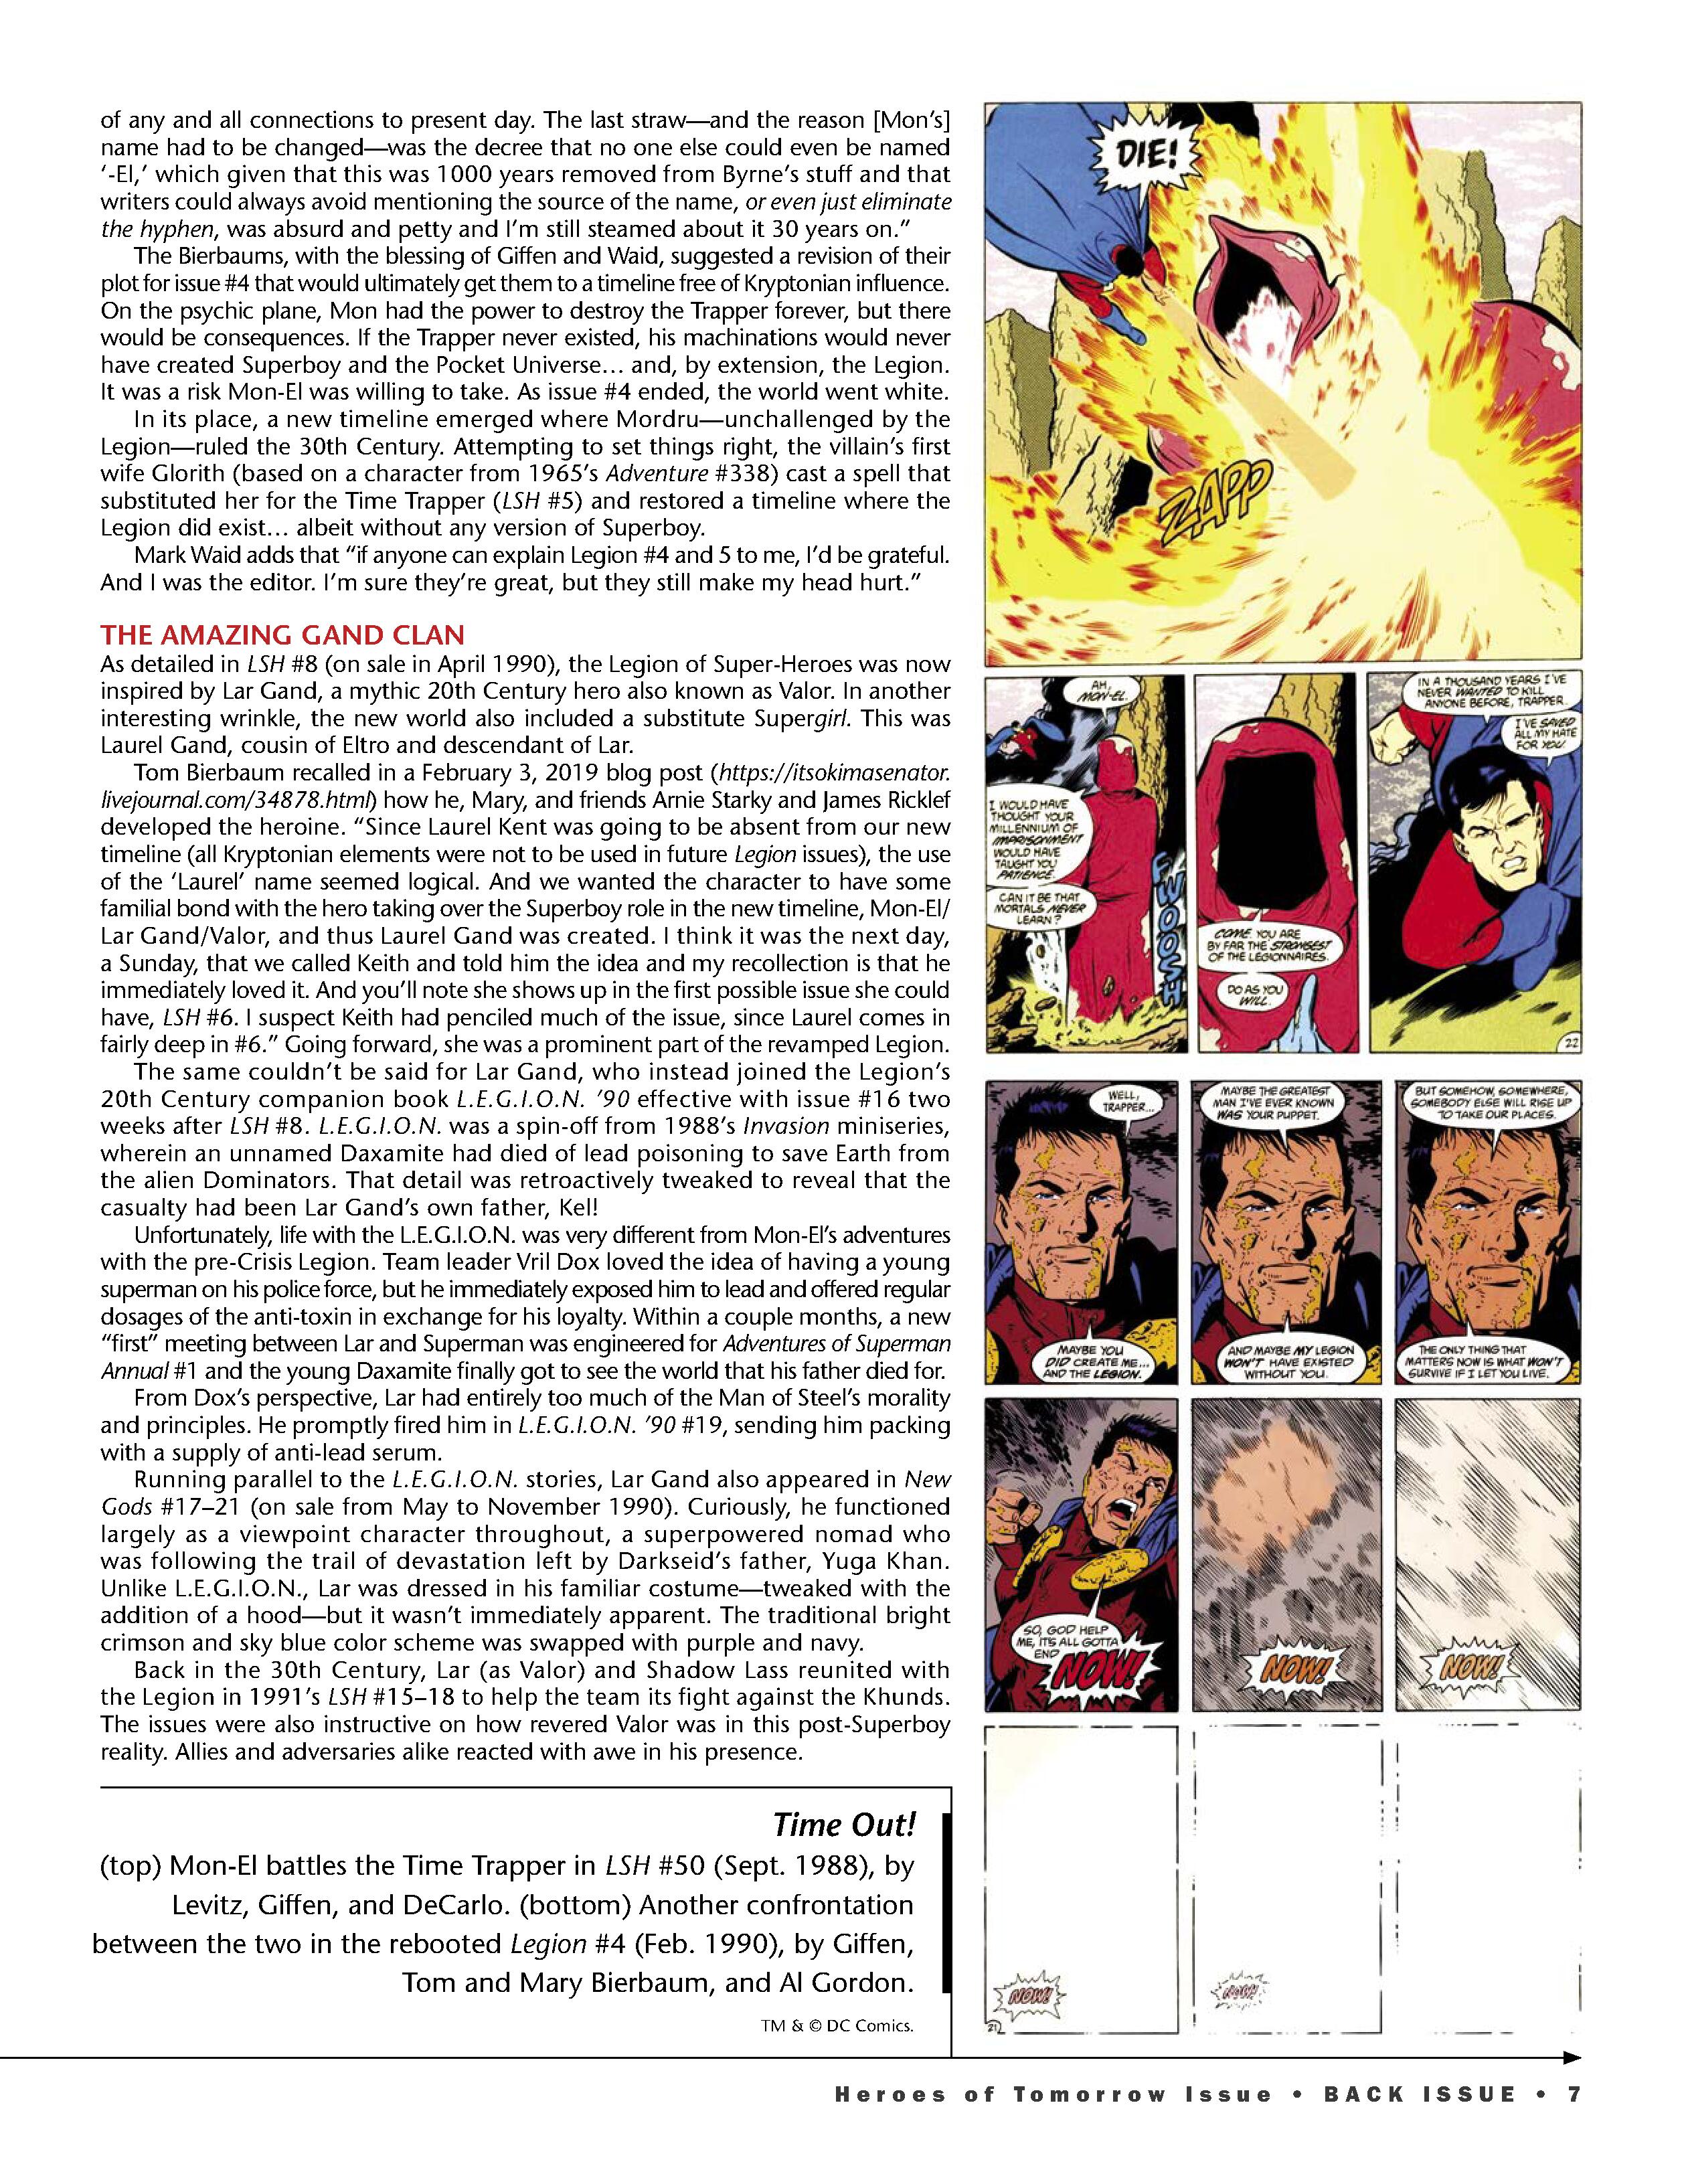 Read online Back Issue comic -  Issue #120 - 9